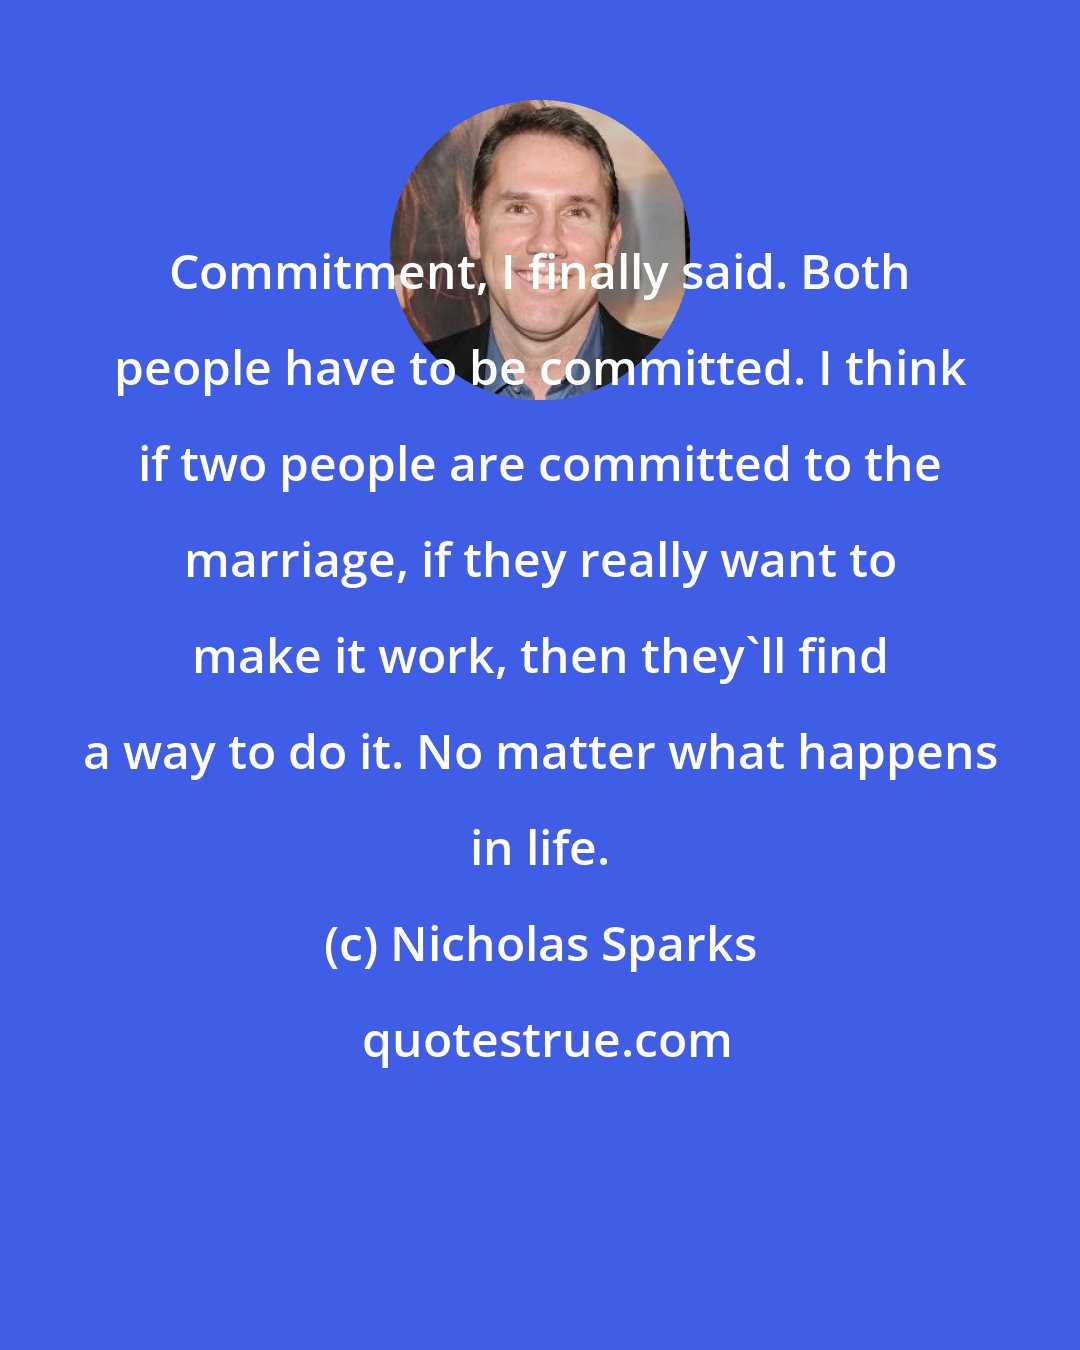 Nicholas Sparks: Commitment, I finally said. Both people have to be committed. I think if two people are committed to the marriage, if they really want to make it work, then they'll find a way to do it. No matter what happens in life.